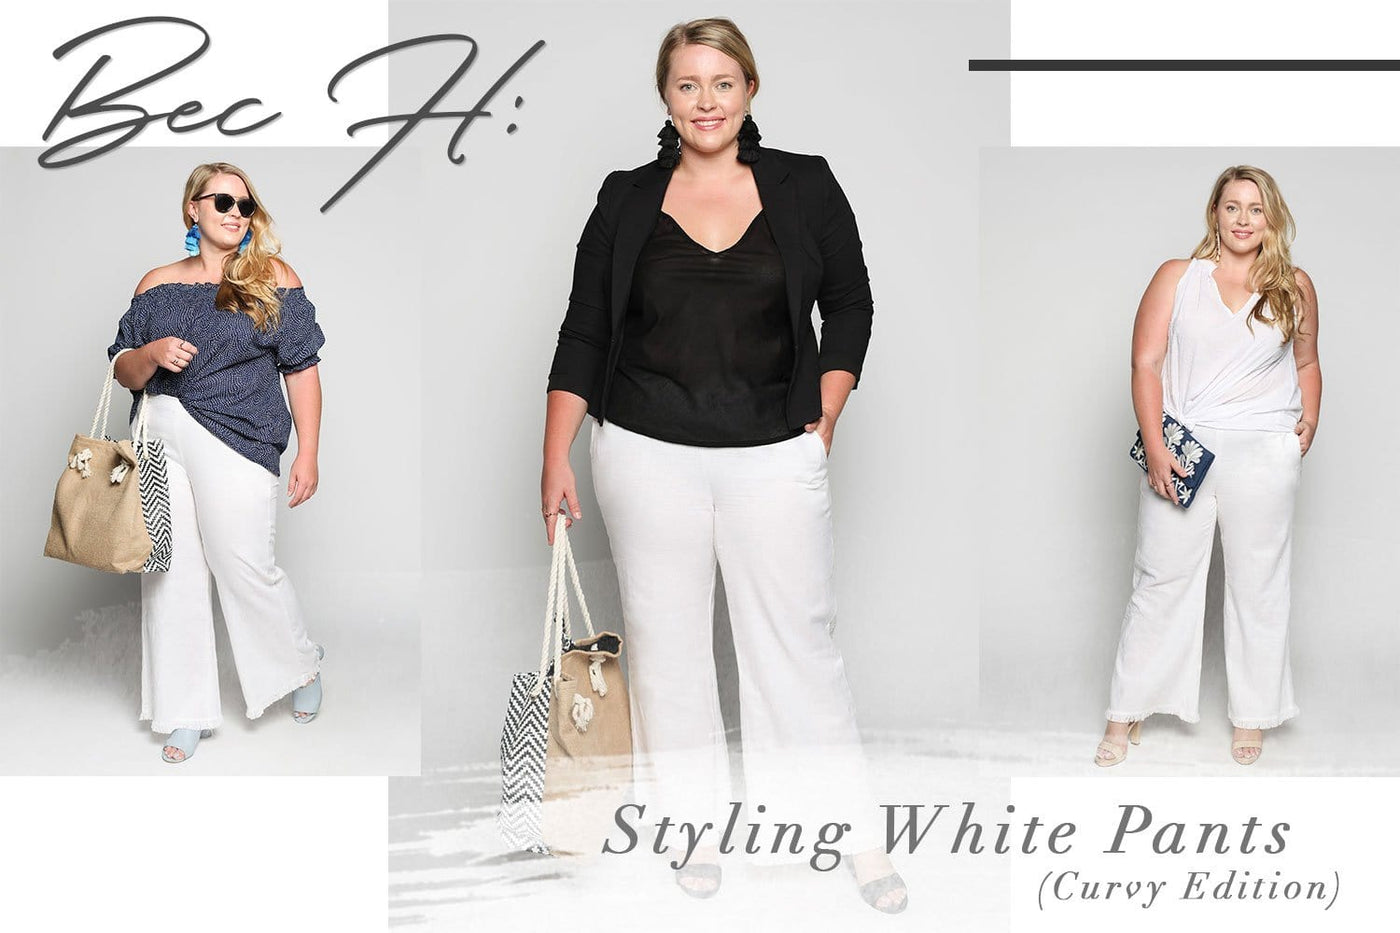 The Style Edit: Styling White Pants (Curvy Edition)